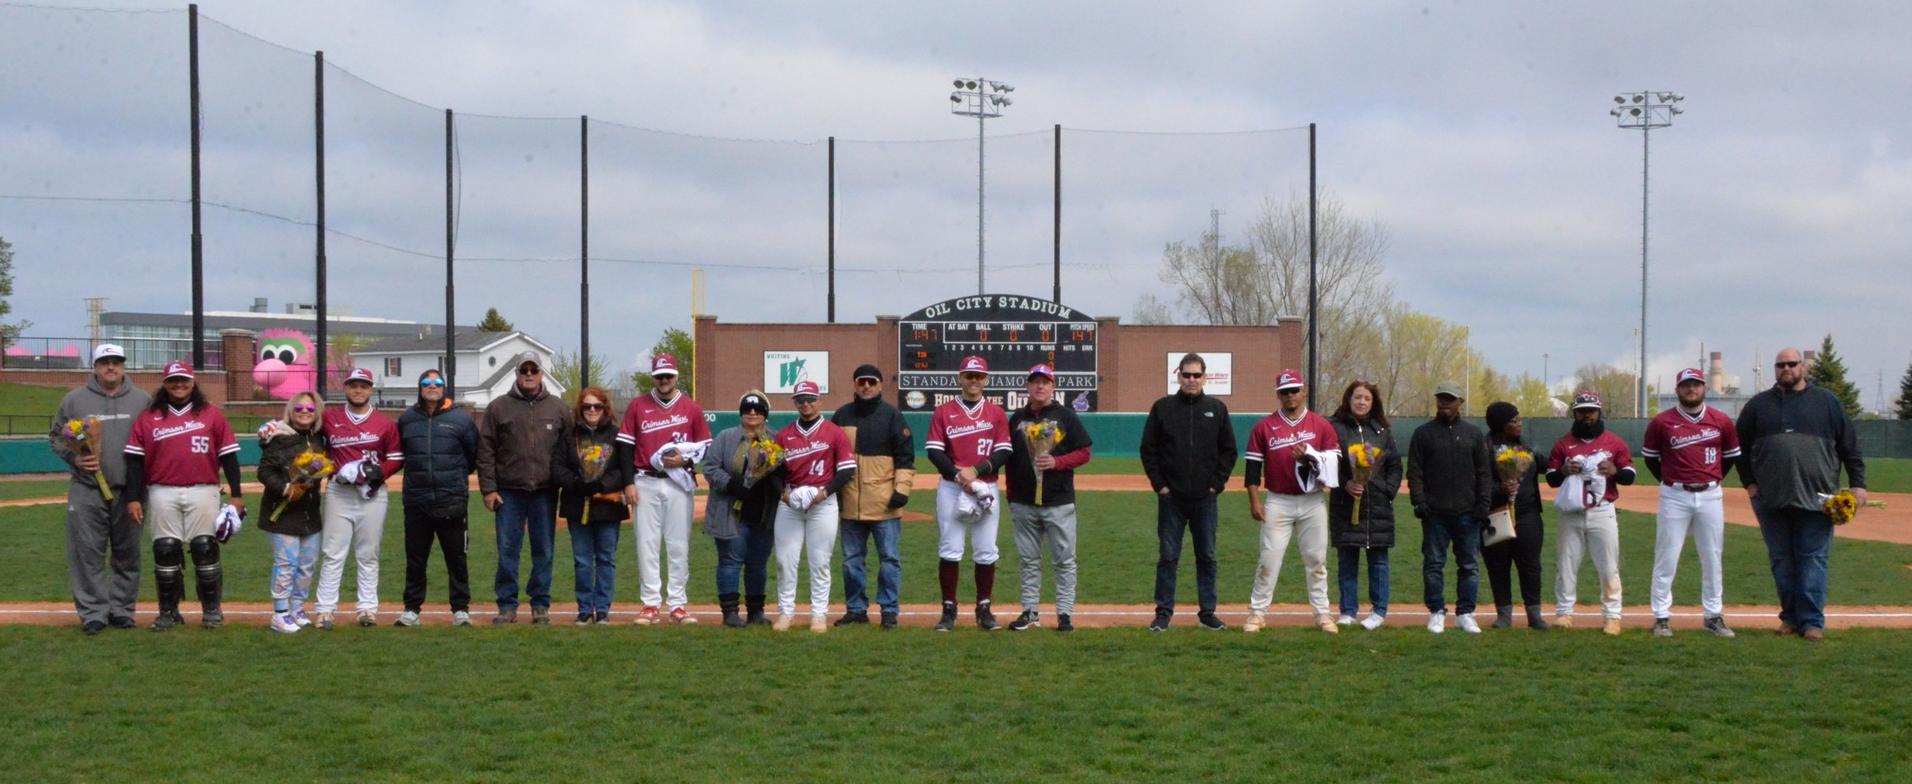 Baseball finishes TIU series with extra innings win on Senior Day